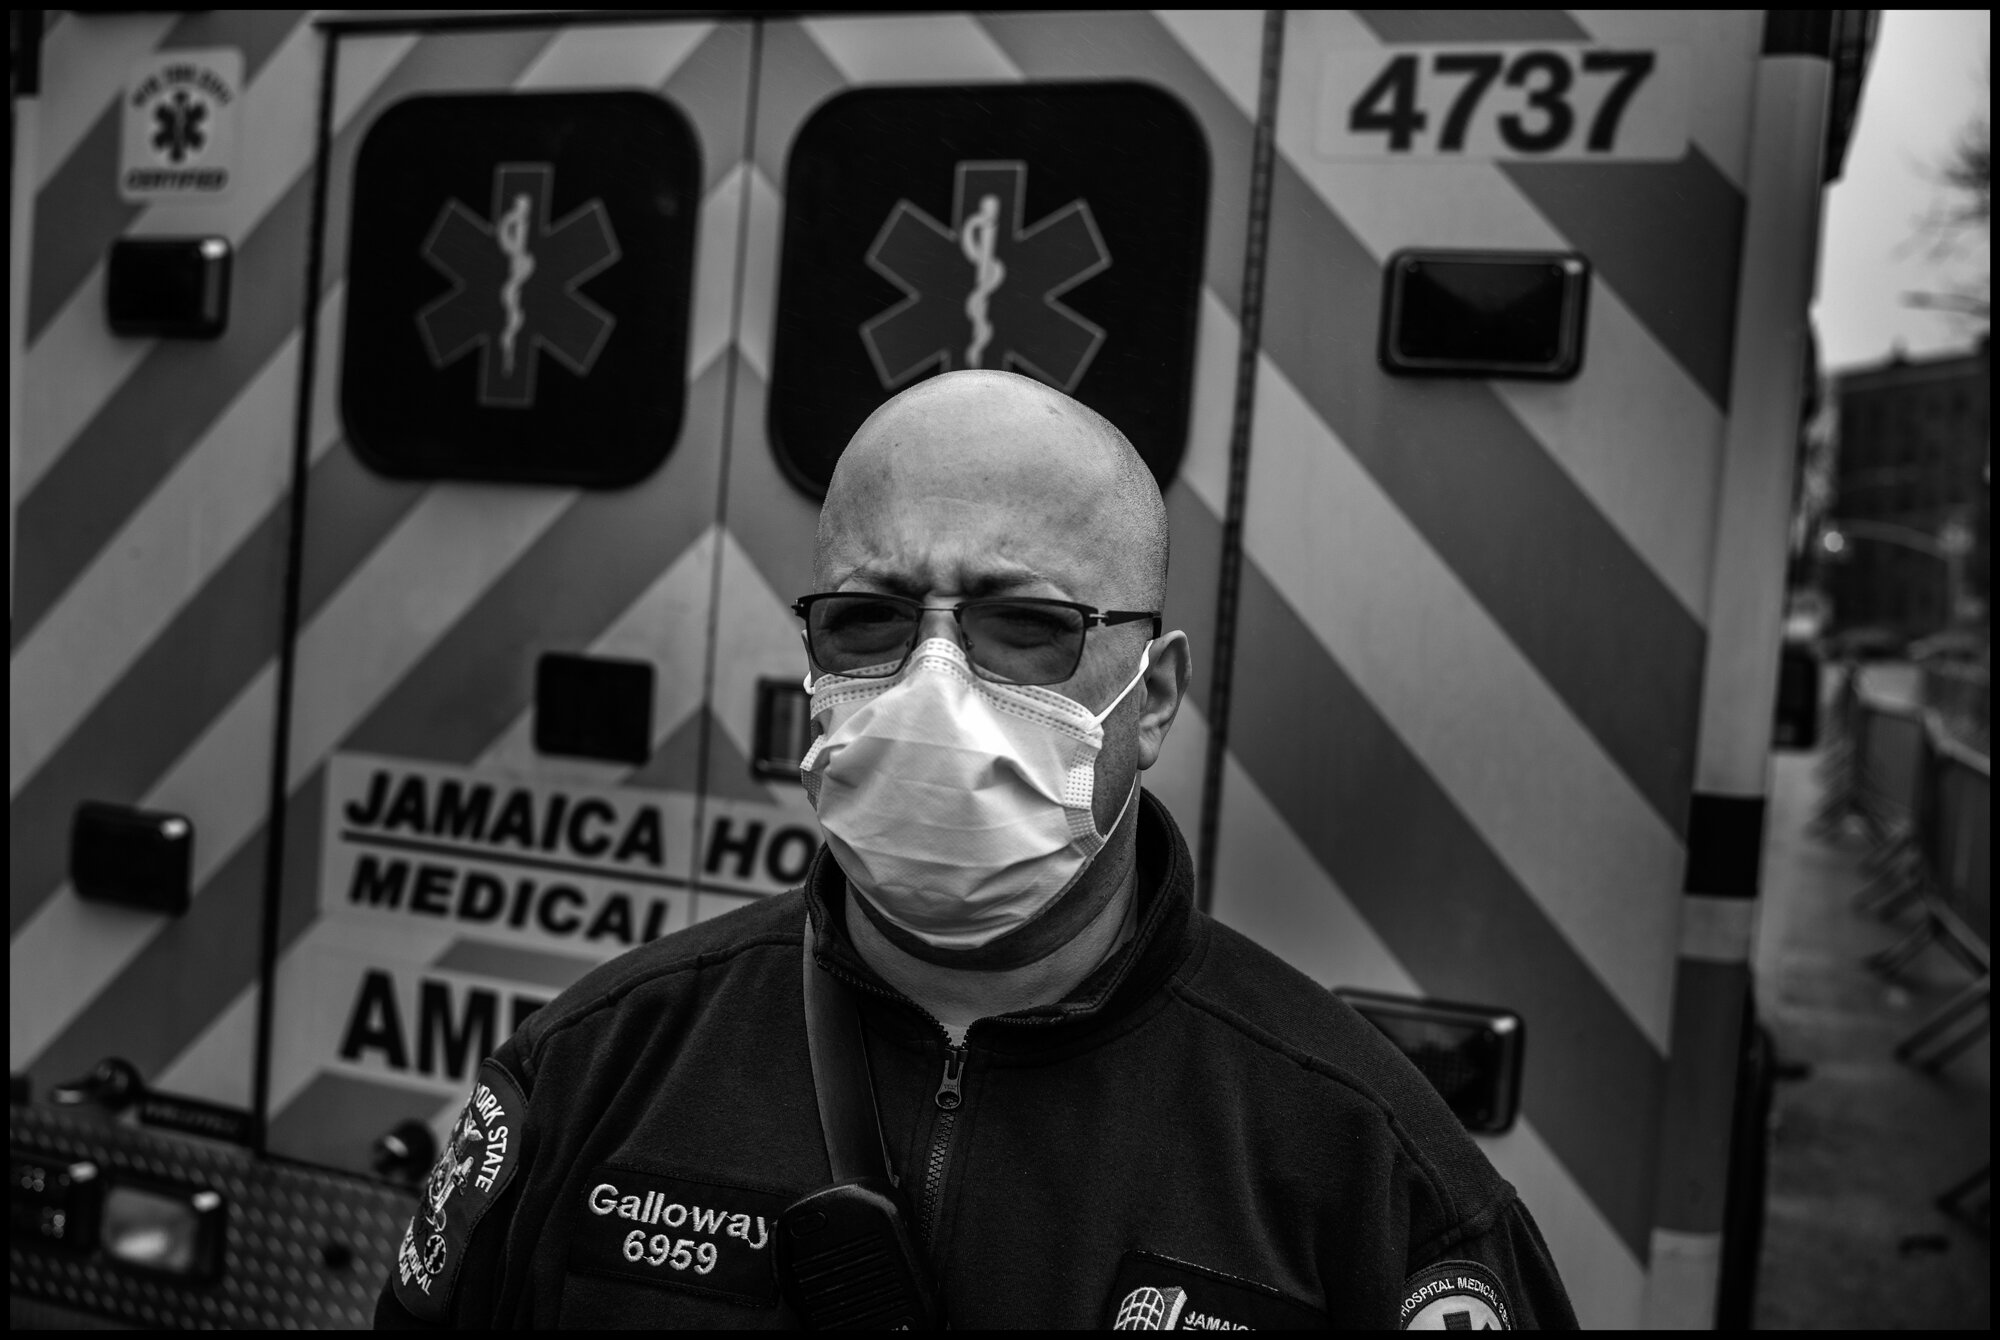  Mike Galloway,&nbsp;ambulance medic.  March 29, 2020. © Peter Turnley  ID# 11-001 